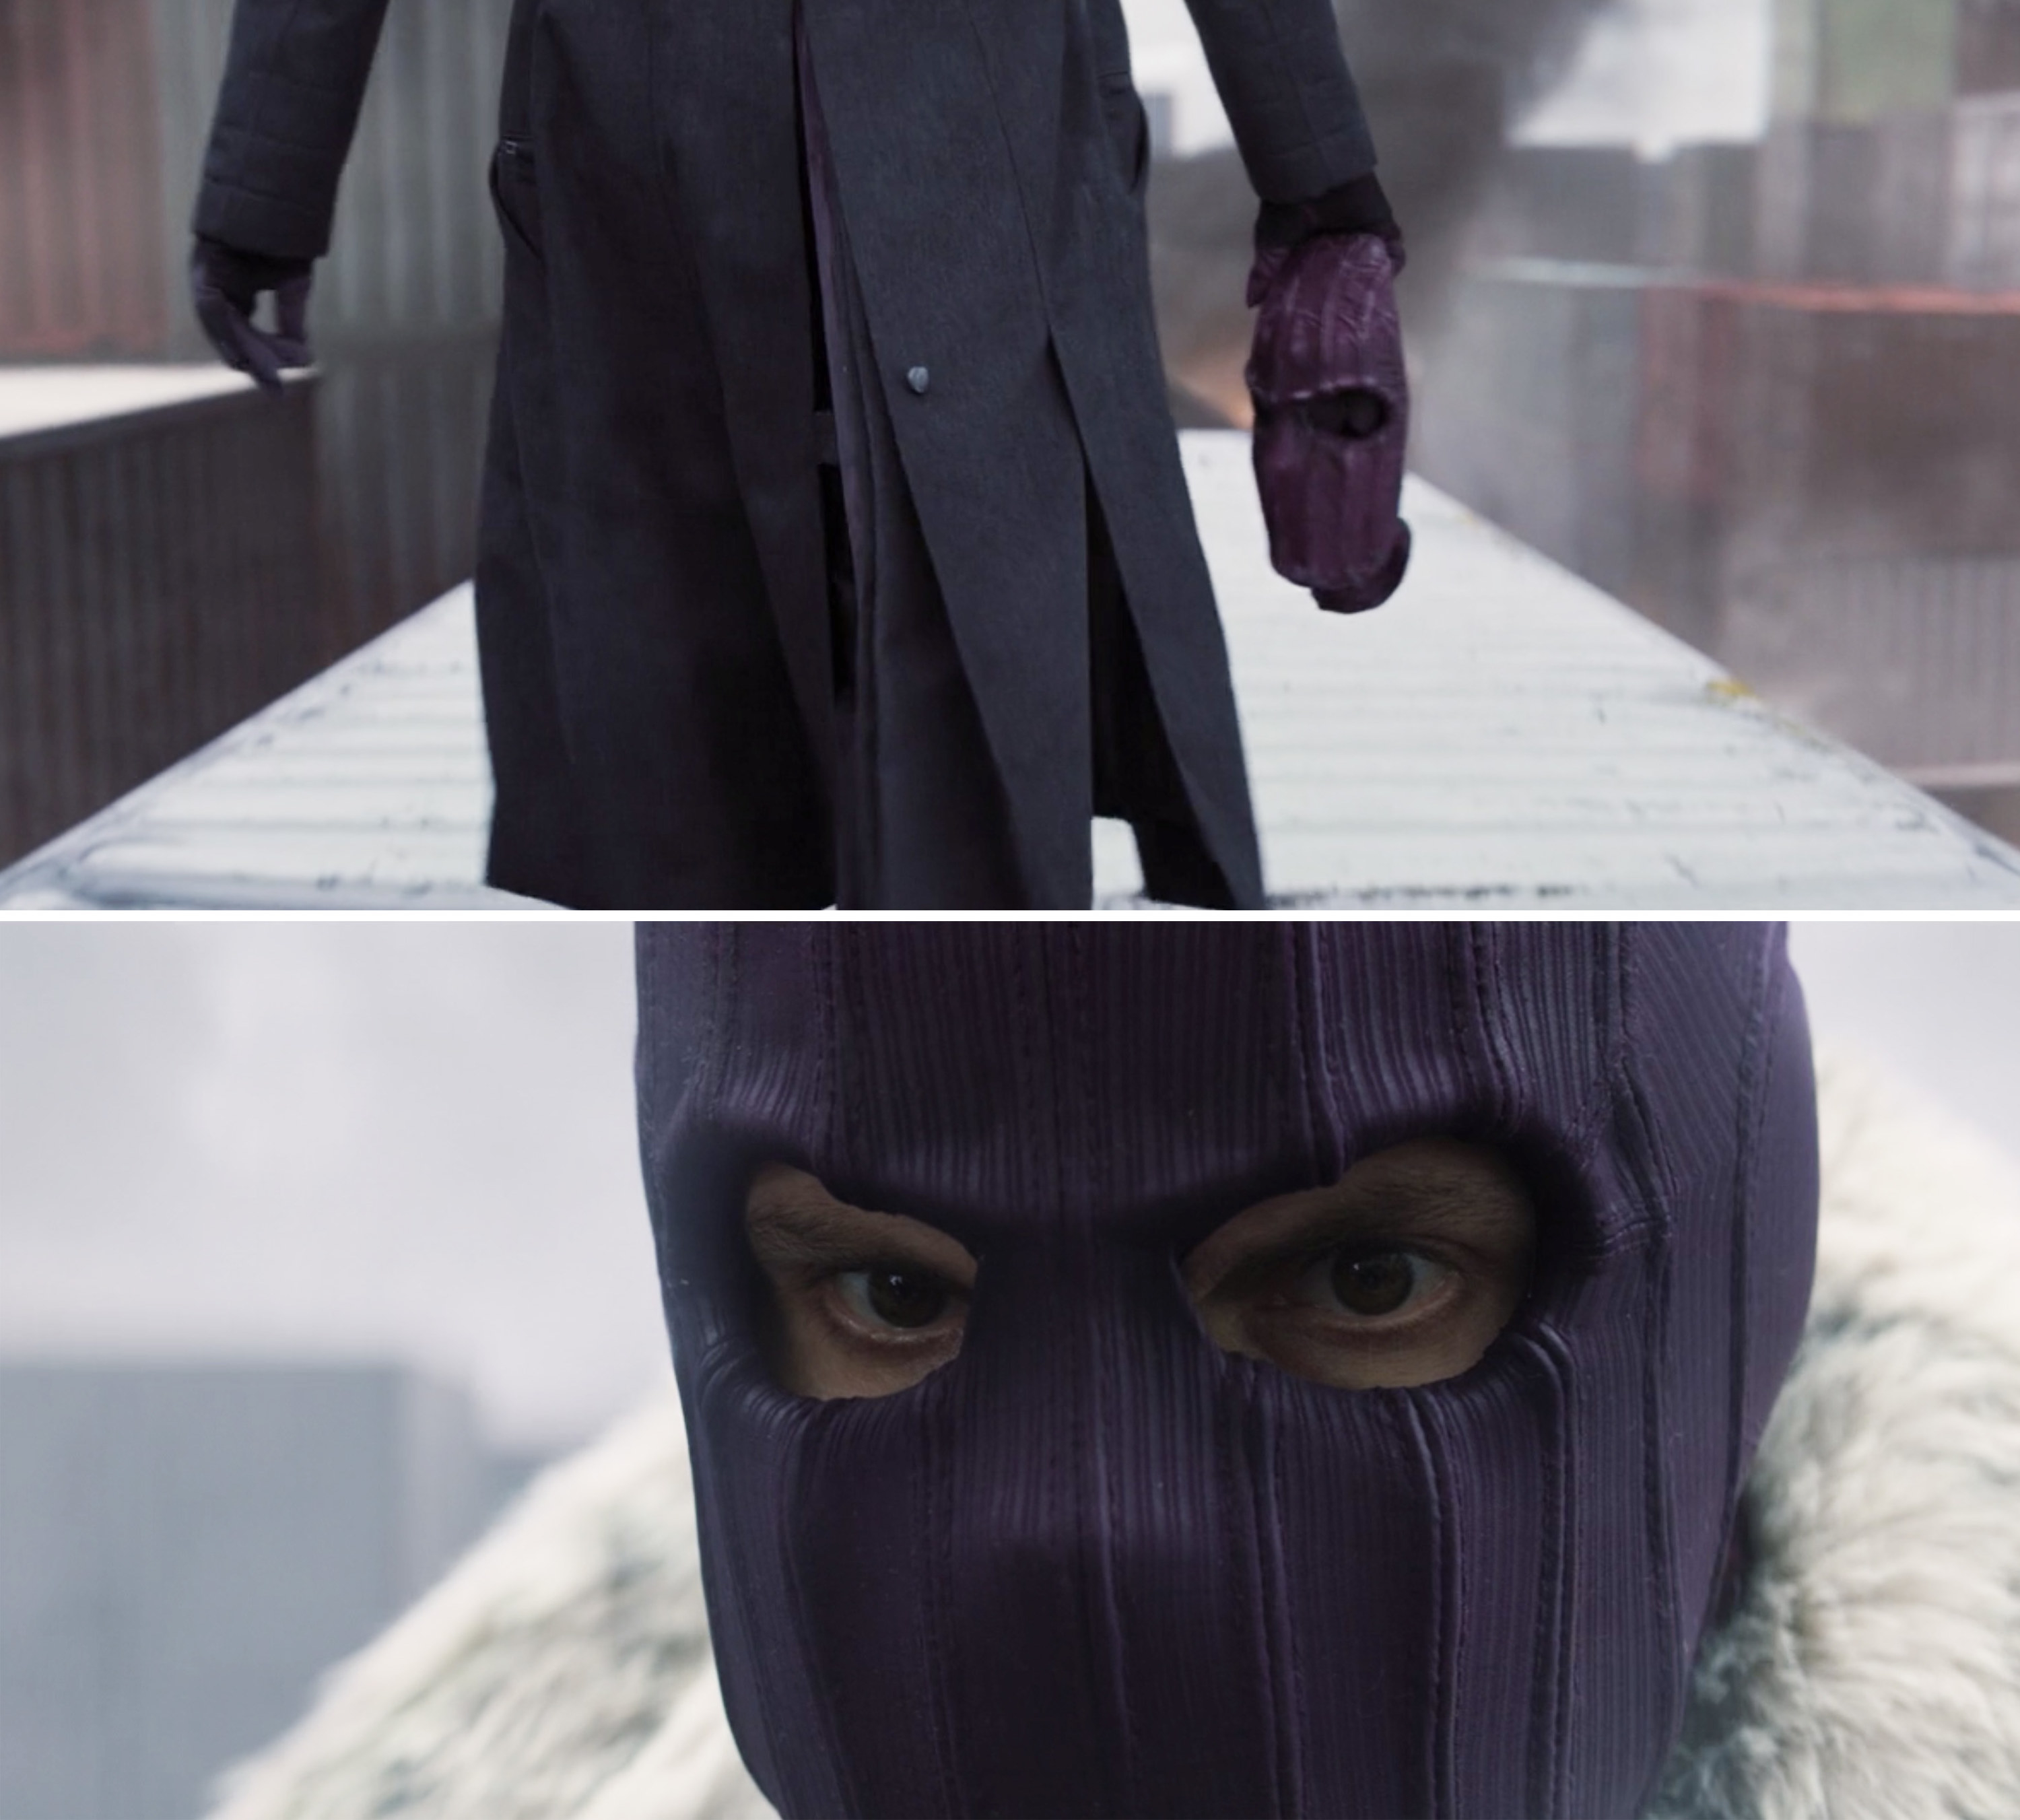 Zemo carrying and then wearing a purple ski mask